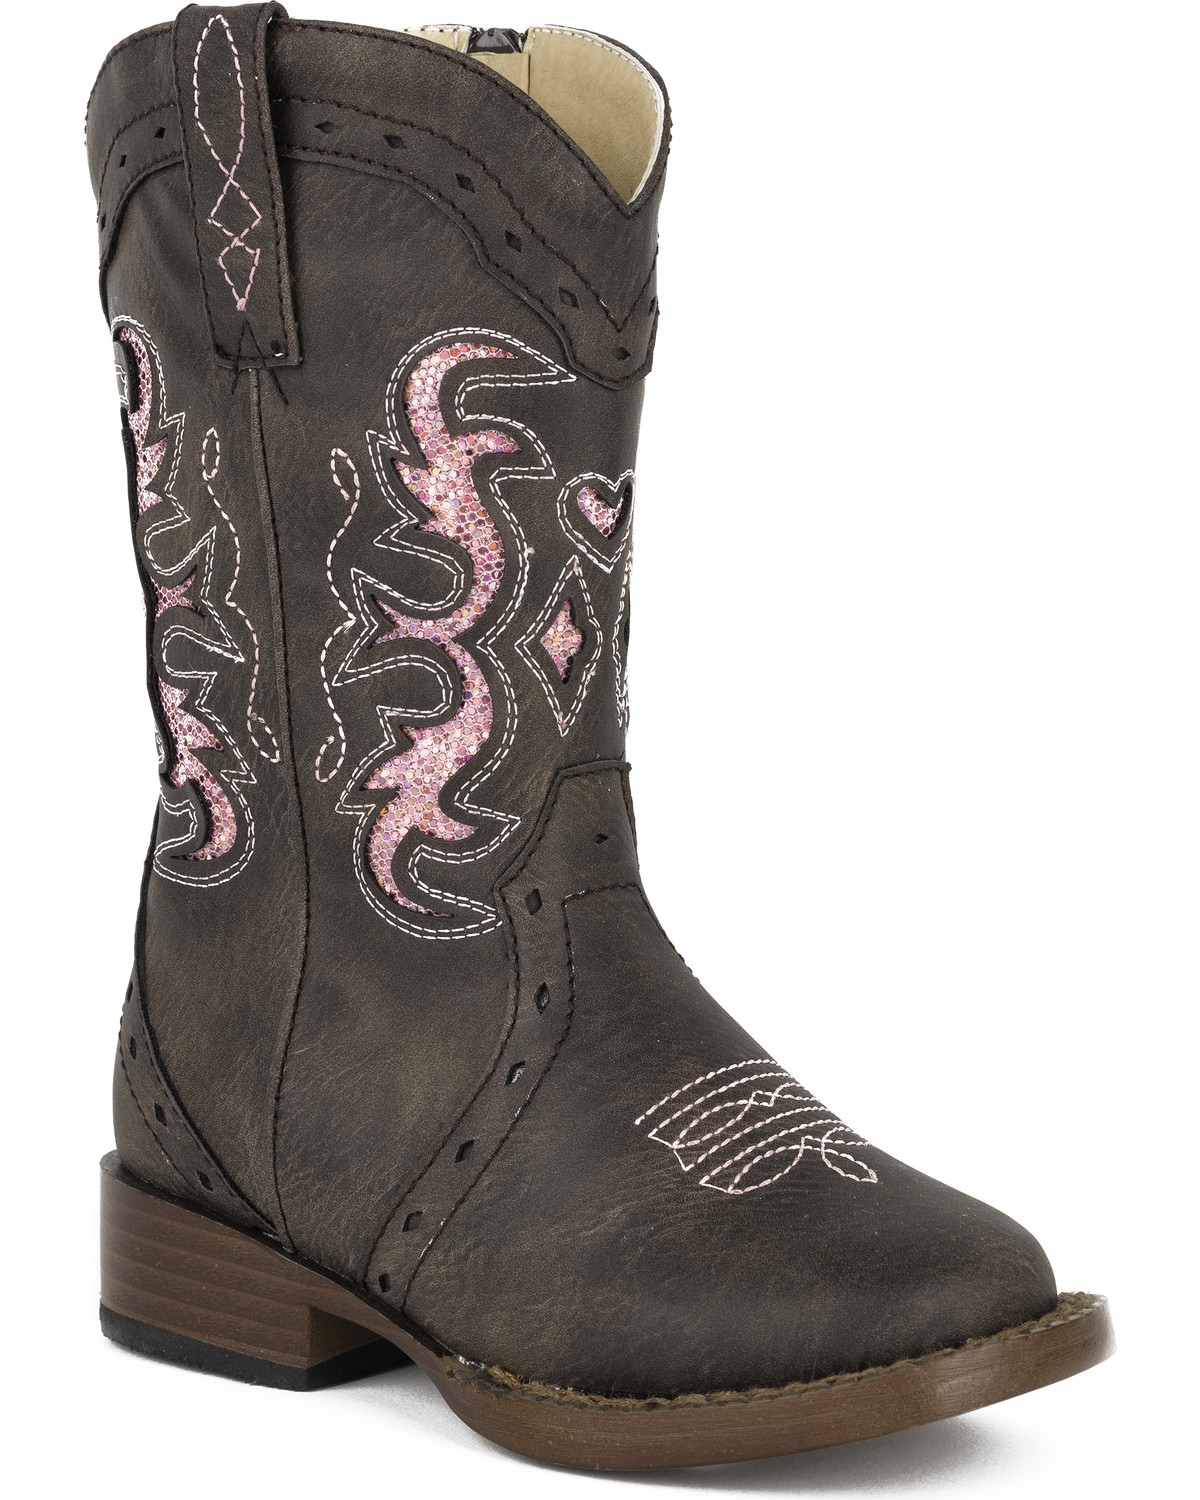 childrens cowboy boots payless